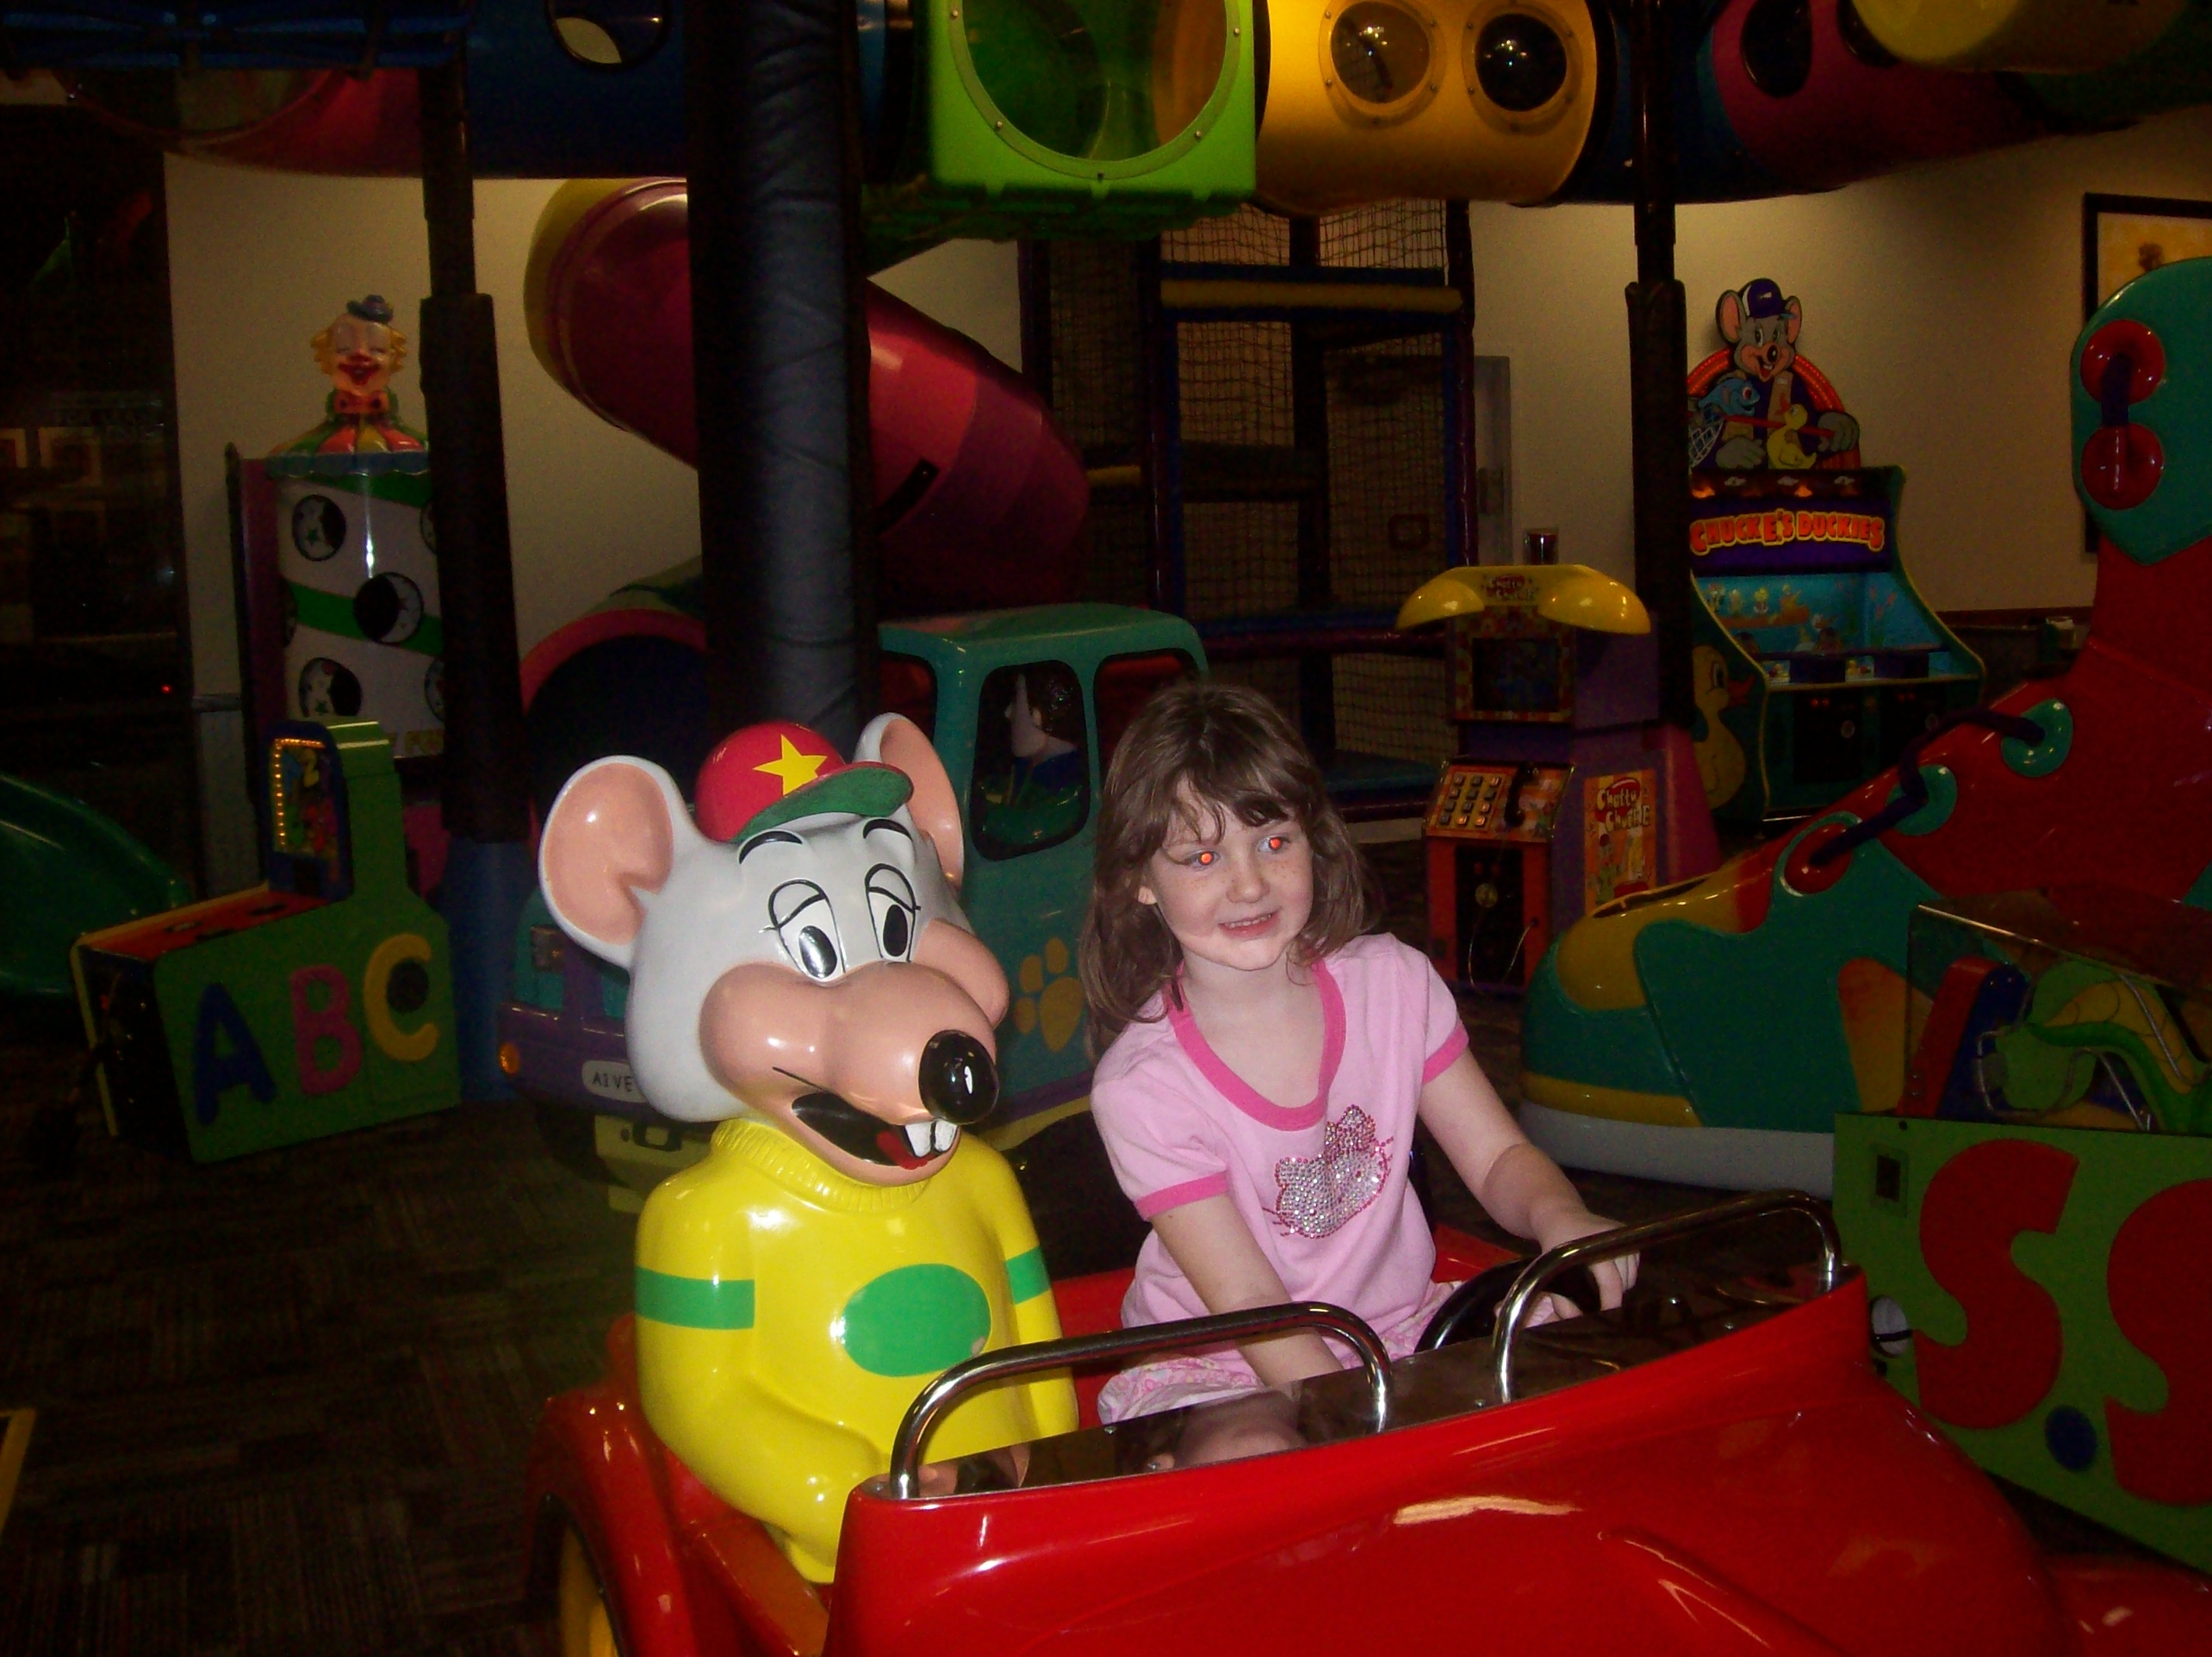 And no trip to Chuck E Cheese is complete without riding in the Chuckie car...